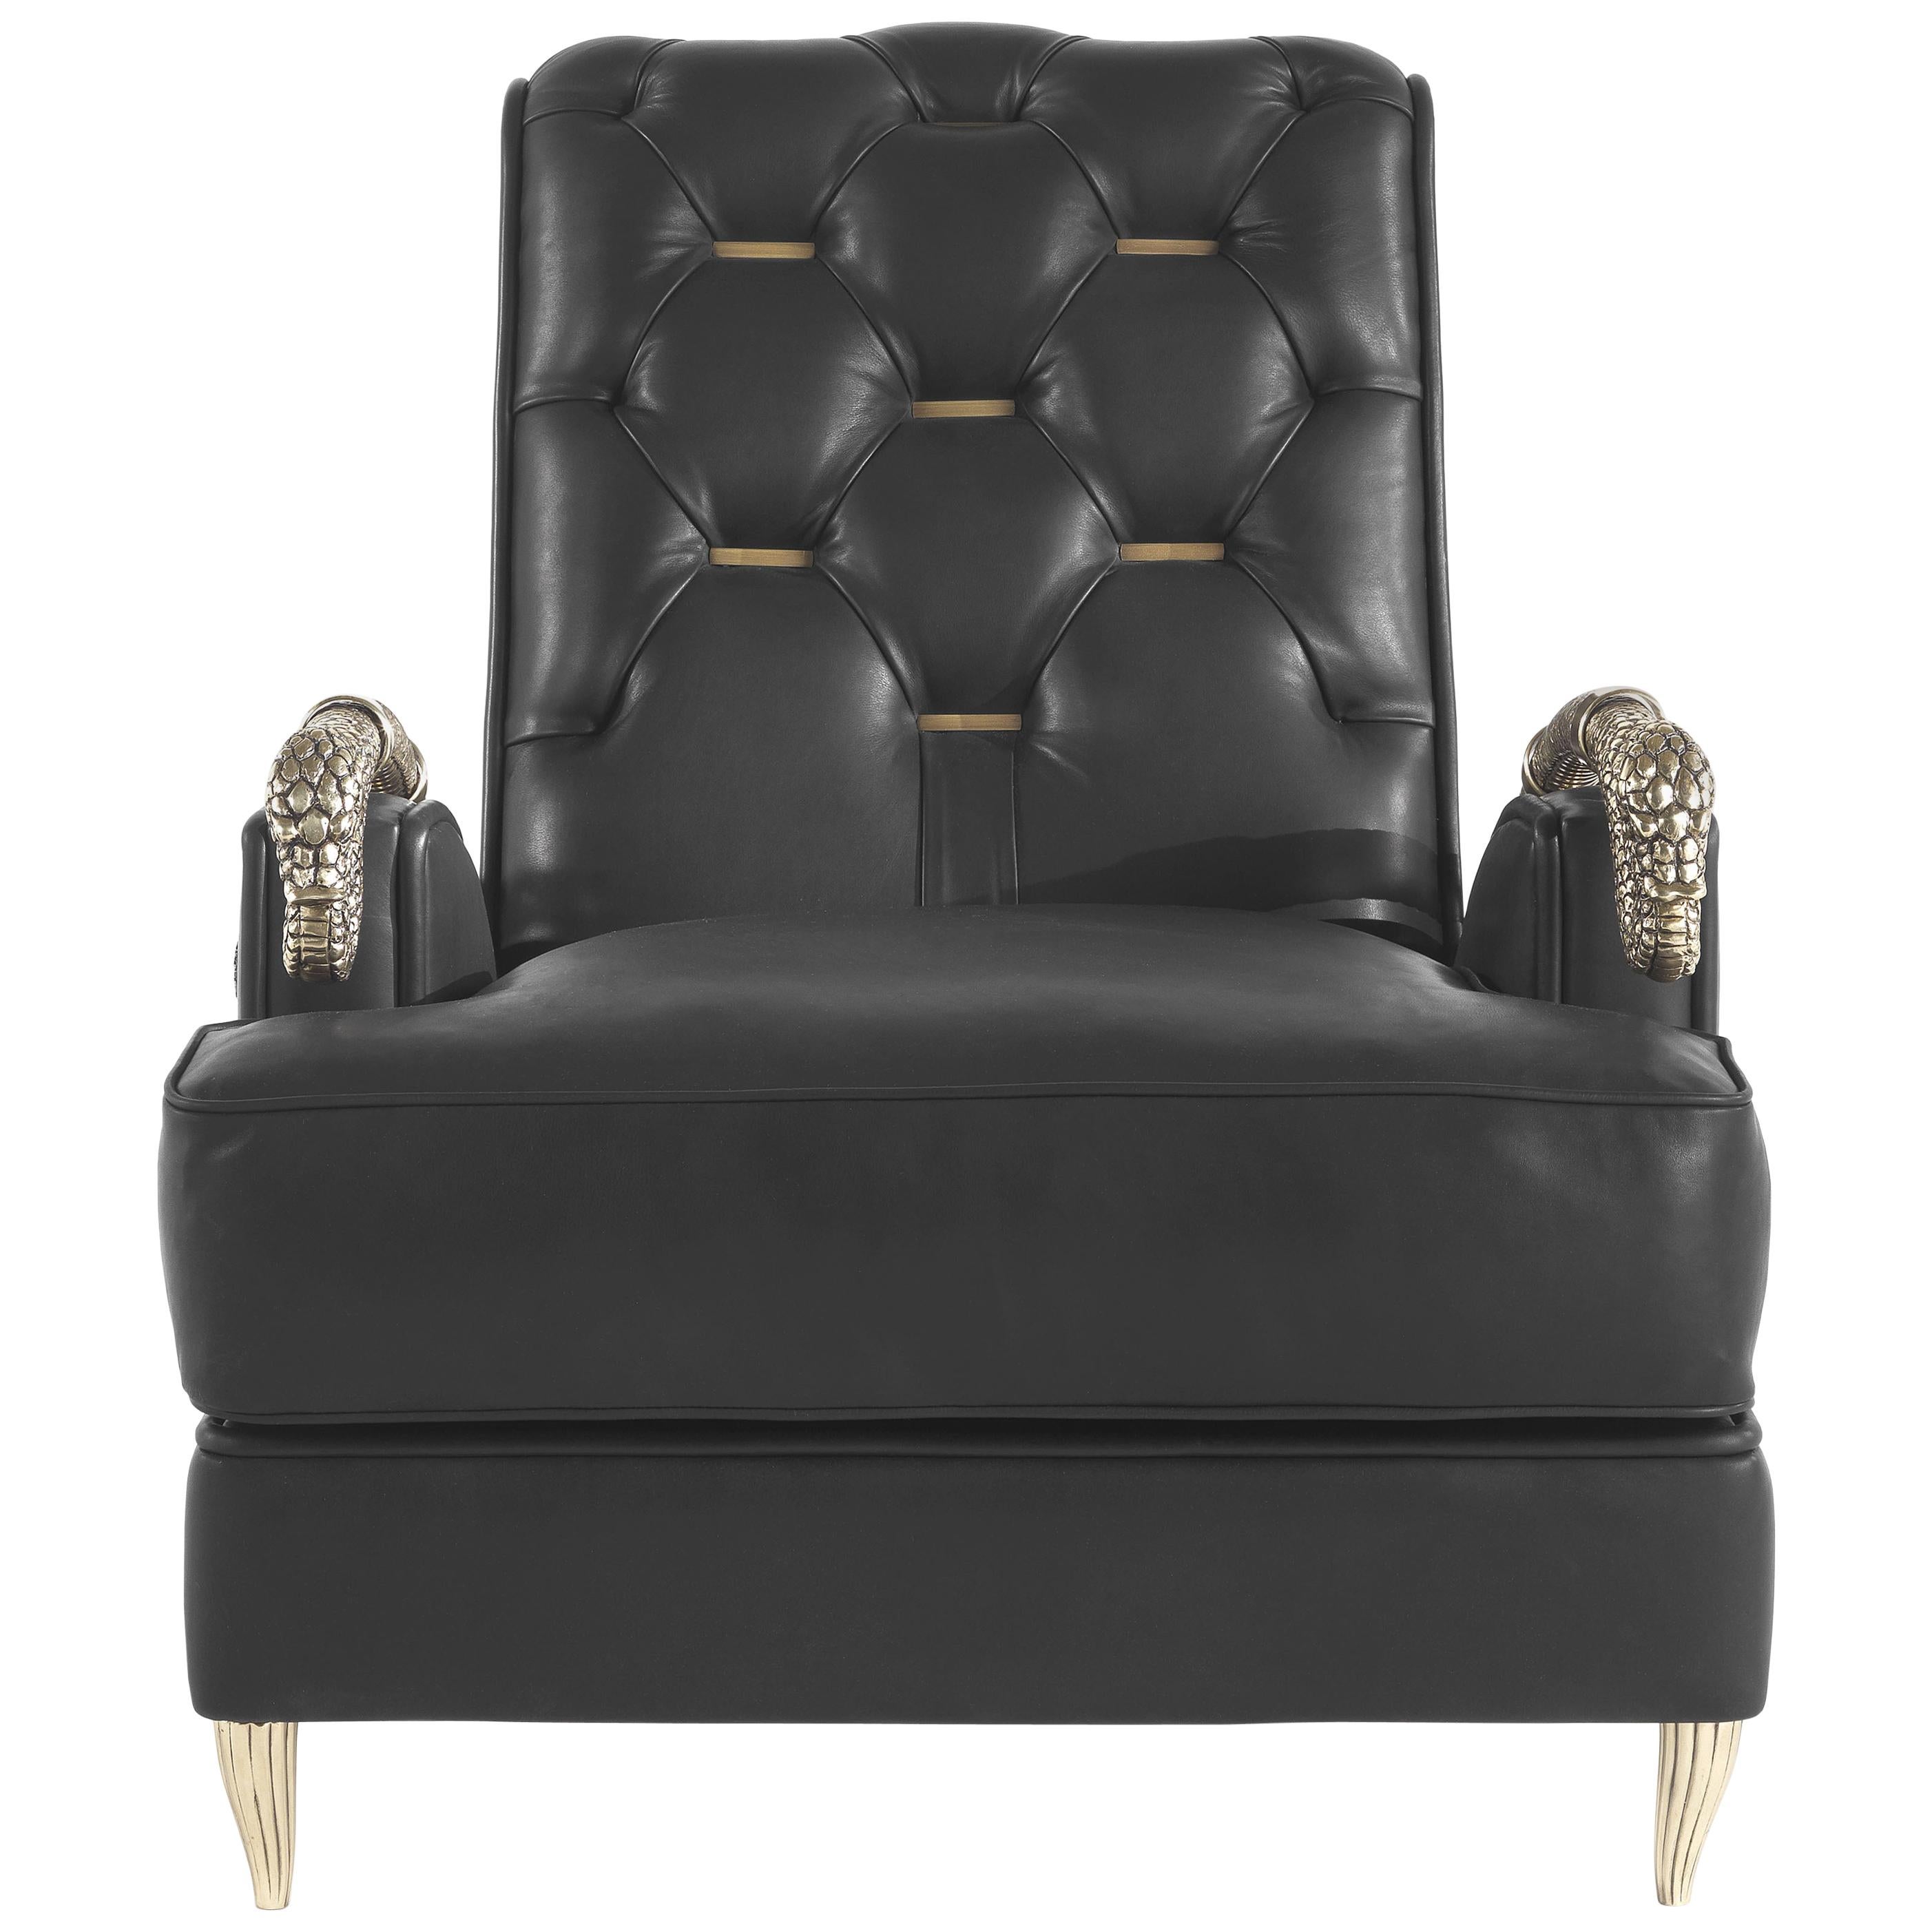 21st Century Snake Armchair in Black Leather by Roberto Cavalli Home Interiors For Sale